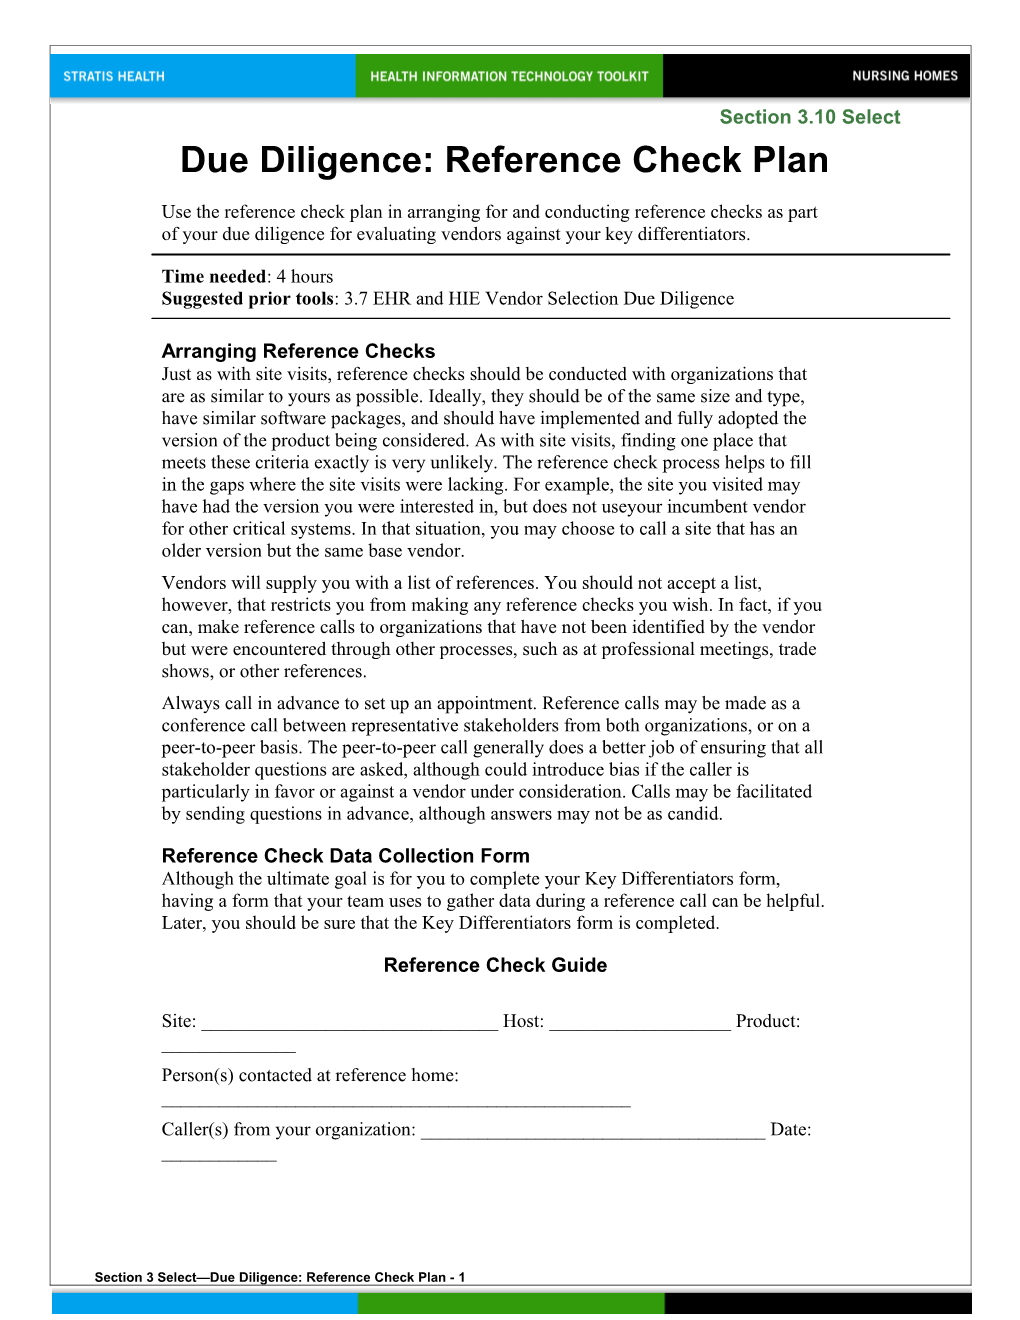 3 Due Diligence: Reference Check Plan